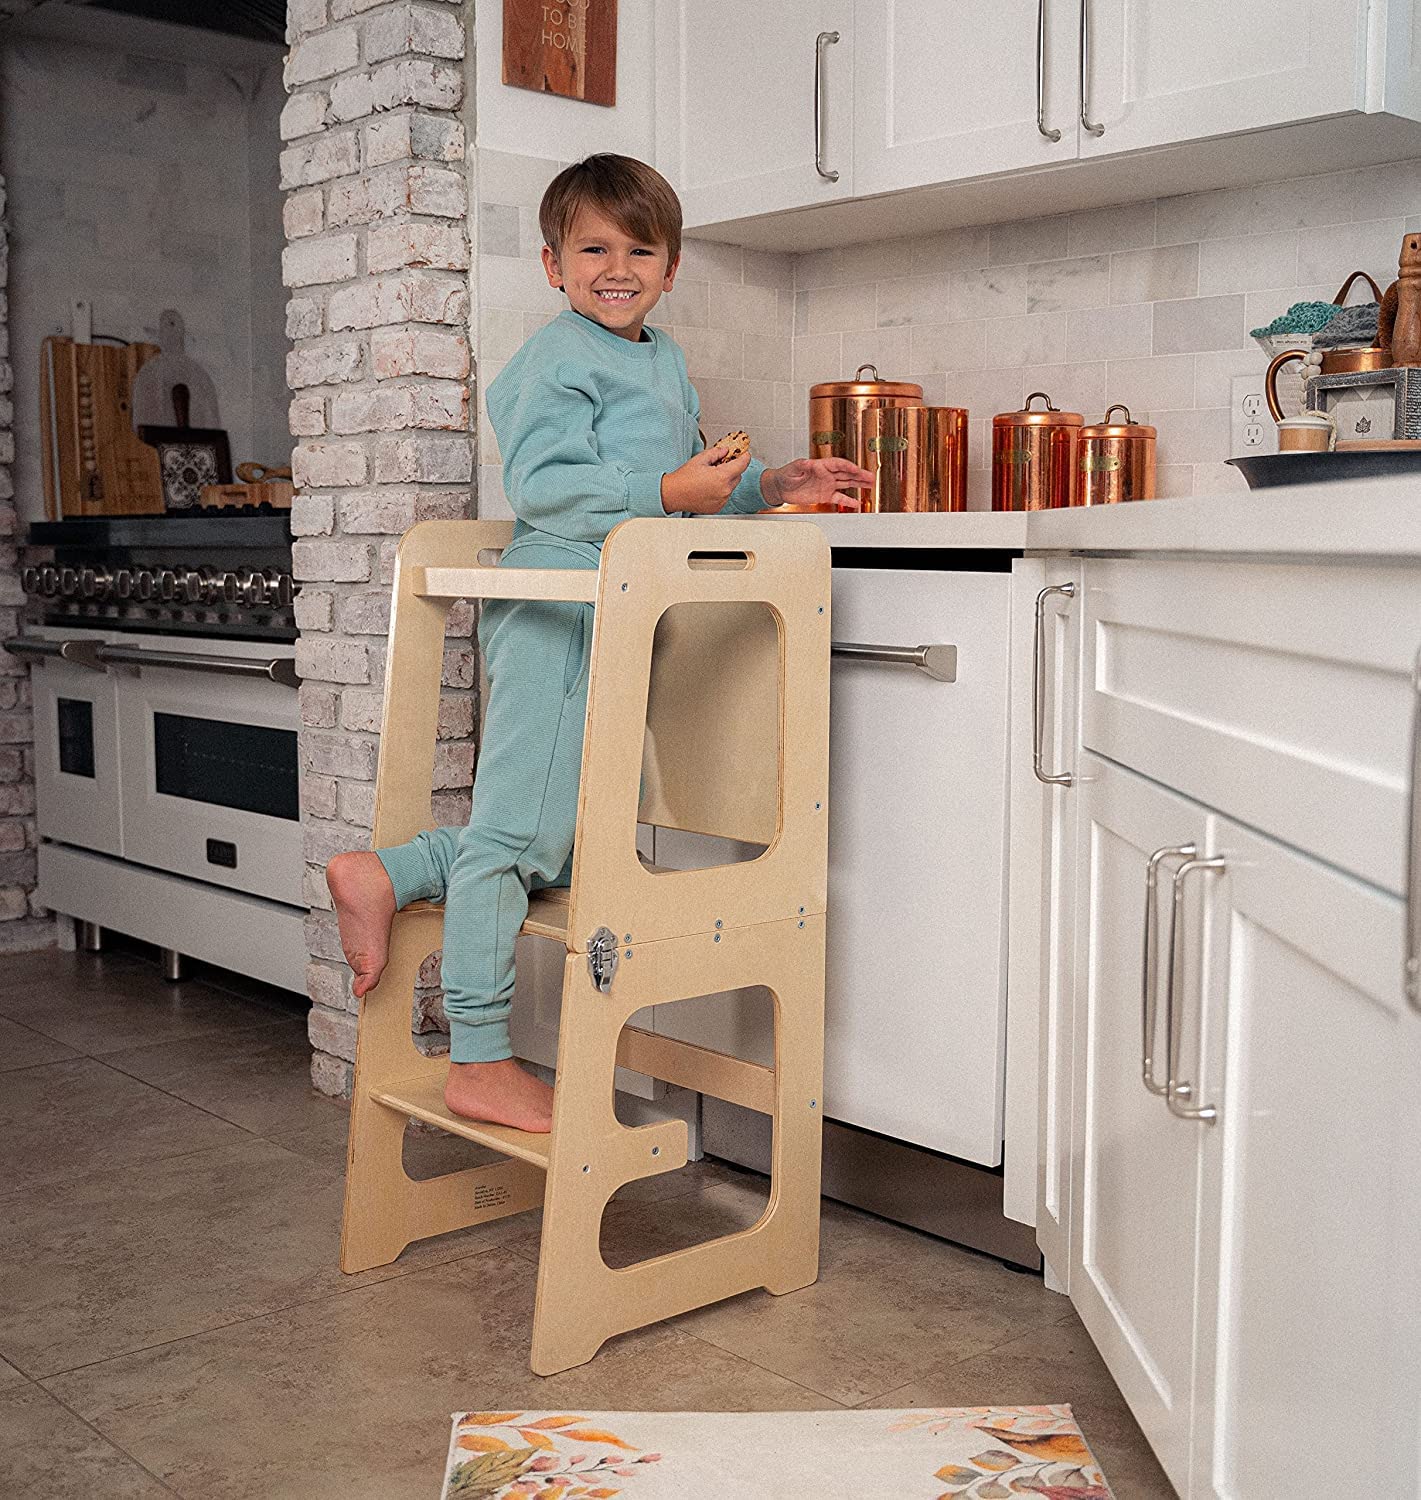 Avenlur 4 in 1 Learning Kitchen Tower Step Stool Helper Montessori Waldorf Style Indoor Counter Stepping Stand and Chalkboard Converts-Folds Into Desk Table, Chair for Toddlers, Children - Gray - image 5 of 7